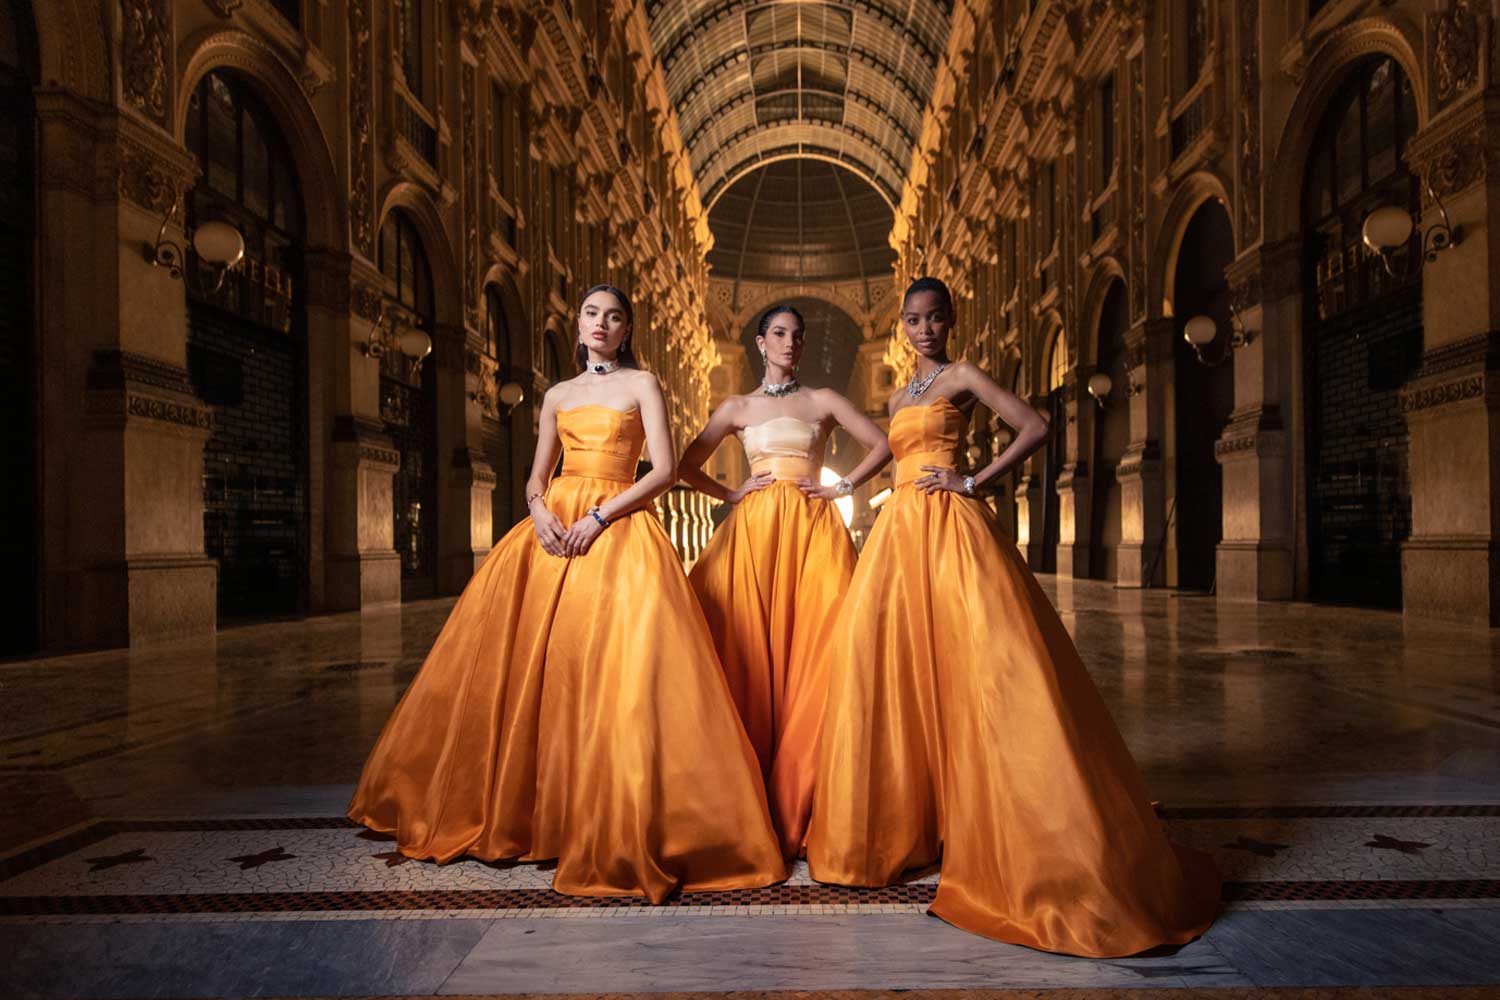 Bulgari’s High Jewellery show at the Galleria Vittorio Emanuele II in Milan has been filmed by Italian director Tommaso Ottomano in collaboration with AMO/Ellen van Loon and Giulio Margheri.